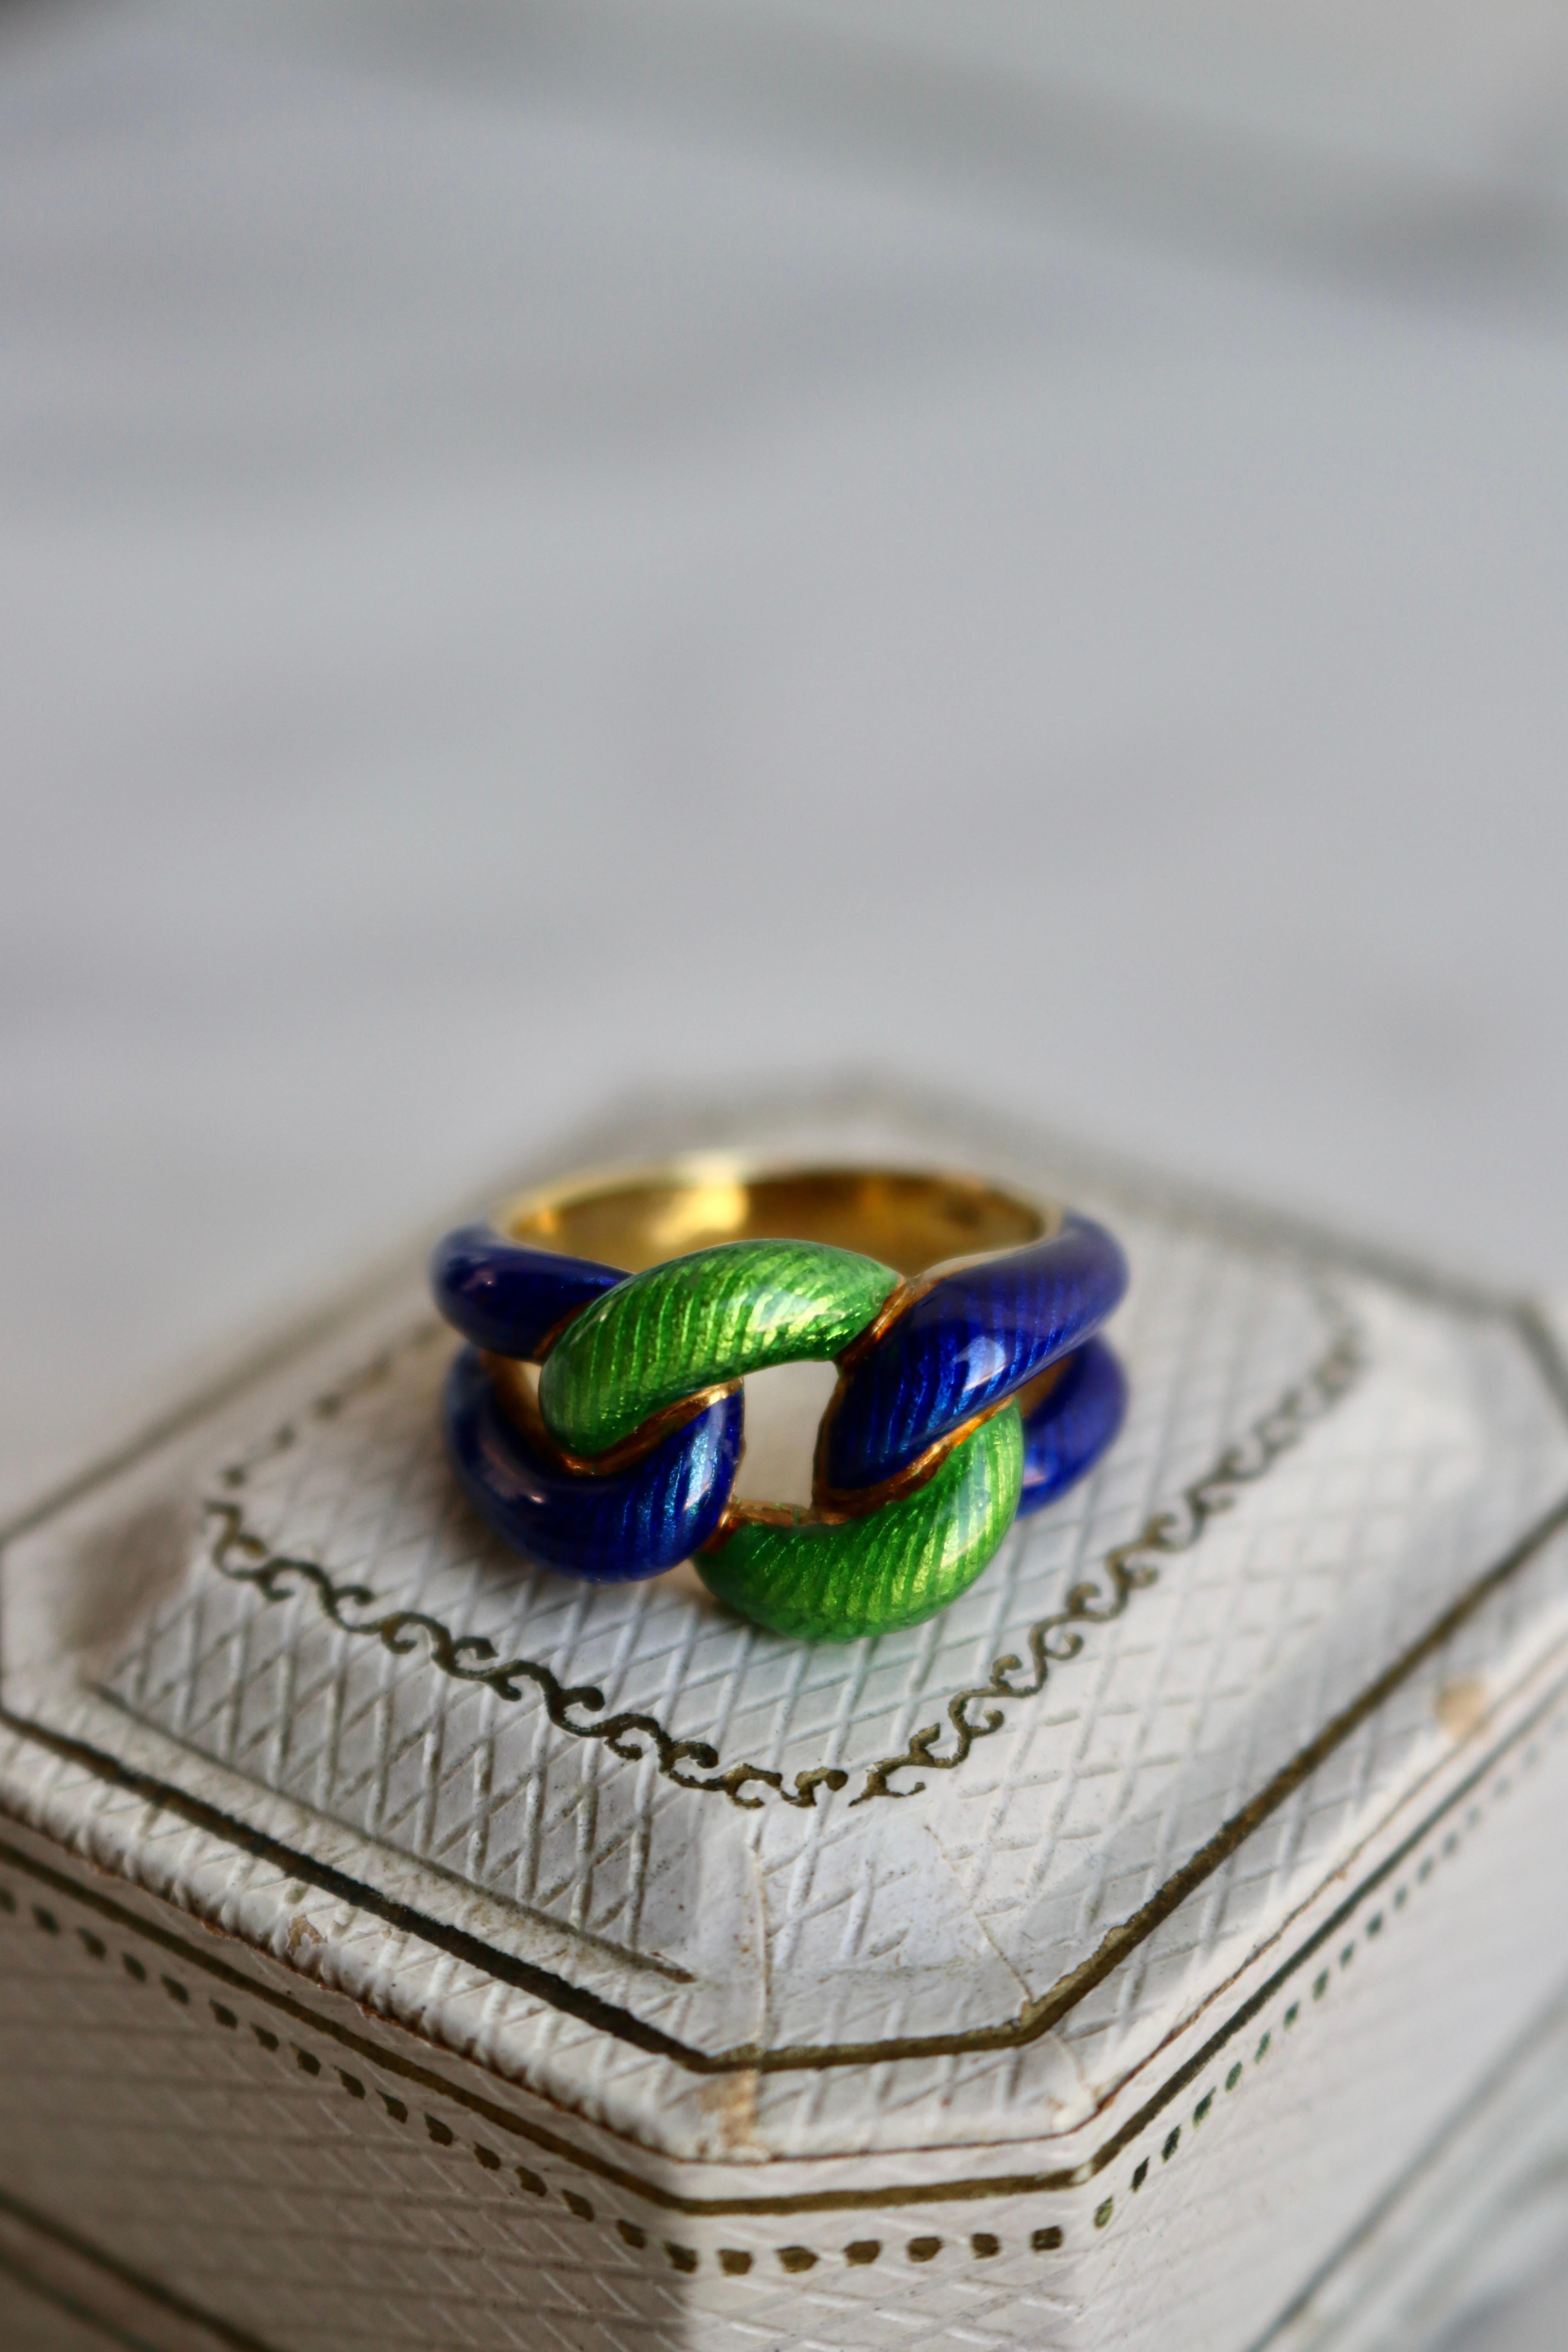 Vintage Tiffany & Co. 18k Yellow Gold Green and Blue Enamel Link Ring 1